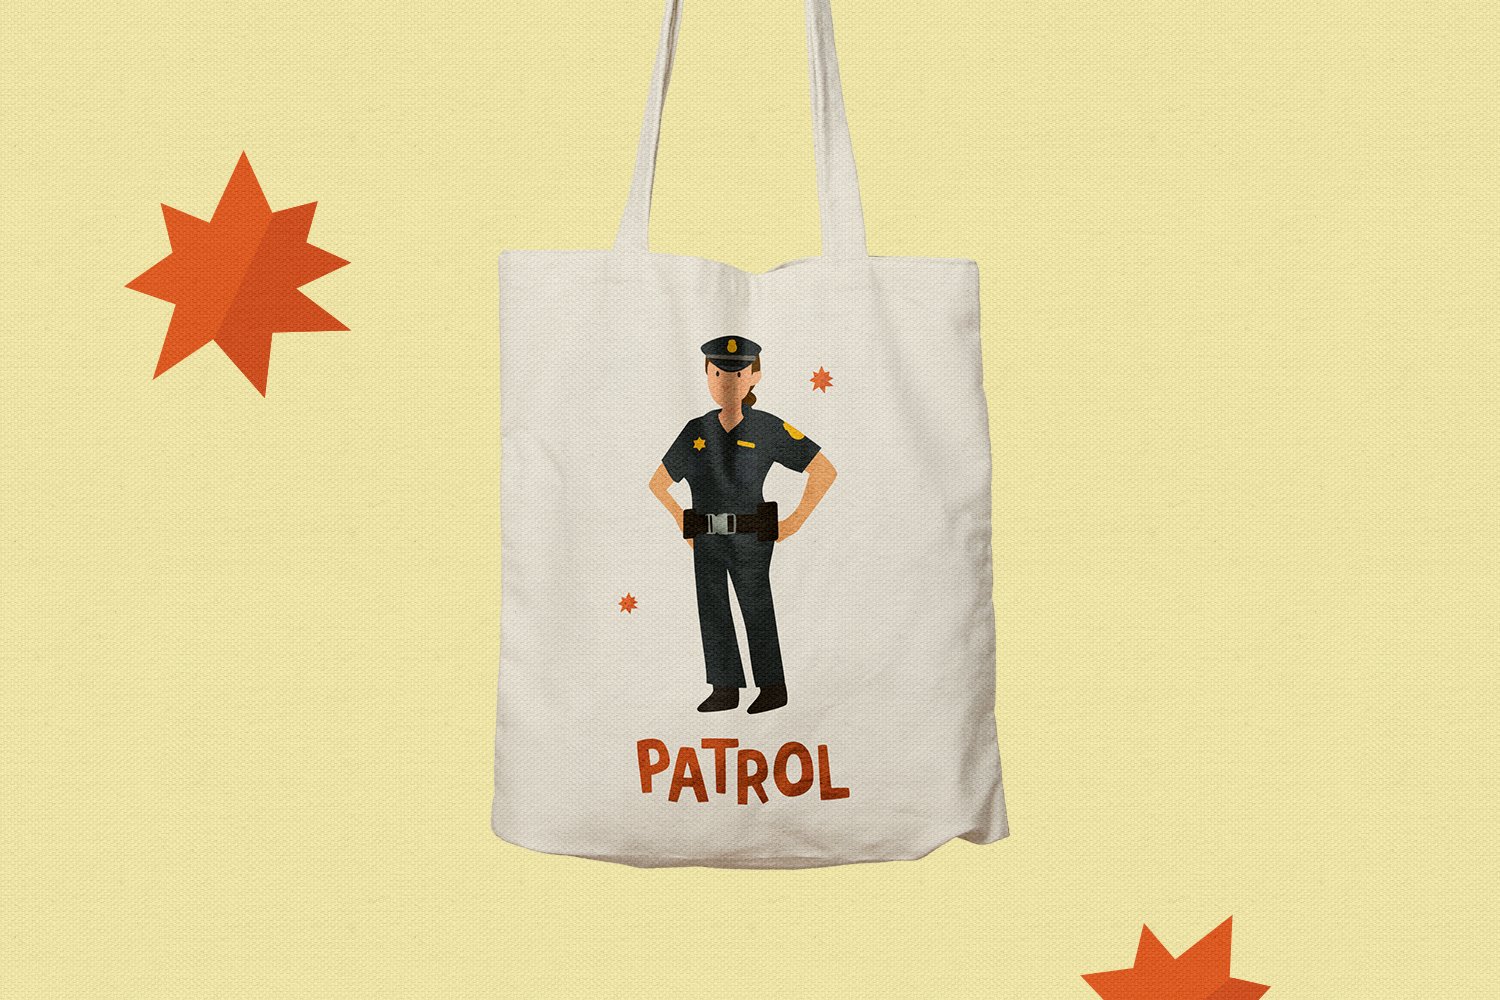 A white shopping bag featuring a female police officer in a black suit and black cap, with the orange lettering "Patrol".